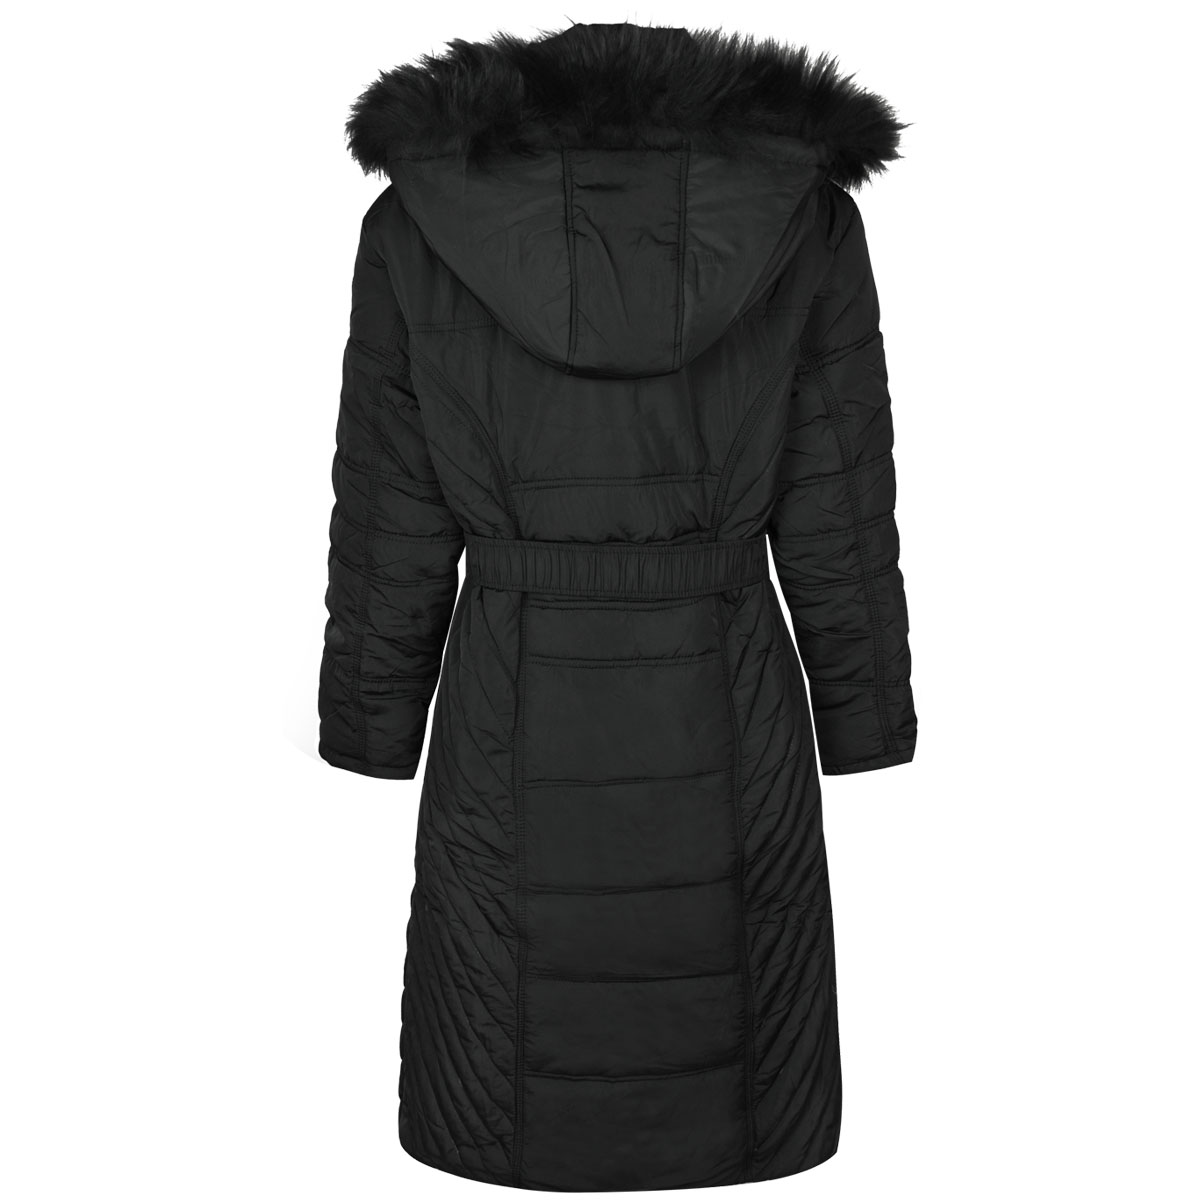 Womens Ladies Long Winter Coat Padded Quilted Puffa Jacket Fur Hooded